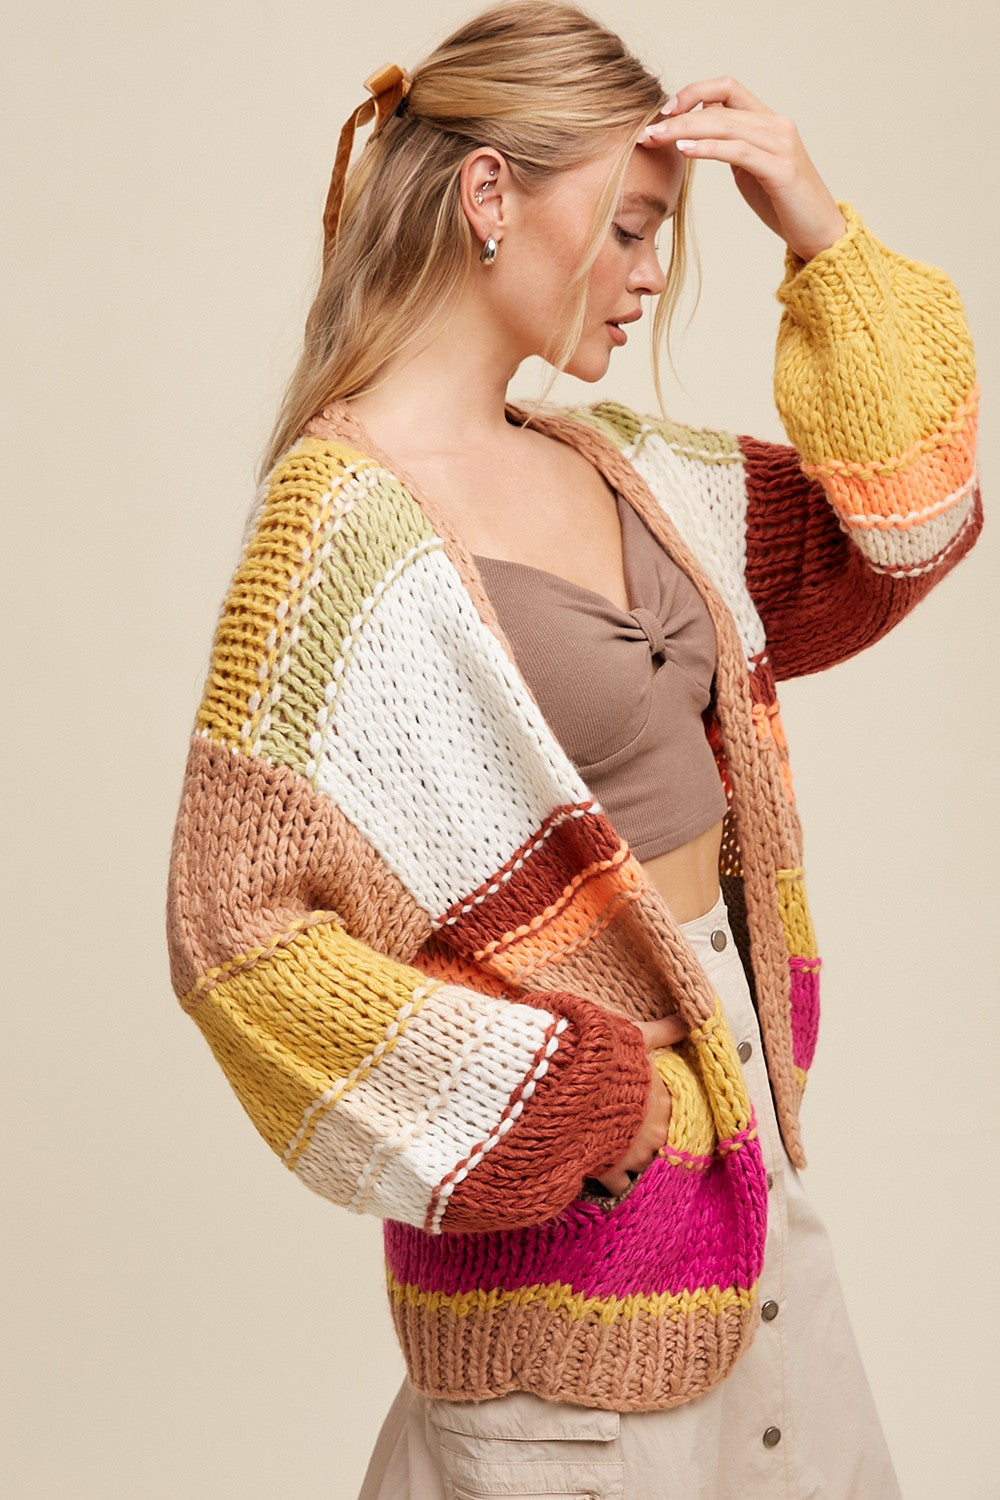 The Emberly Hand Knitted Cardigan